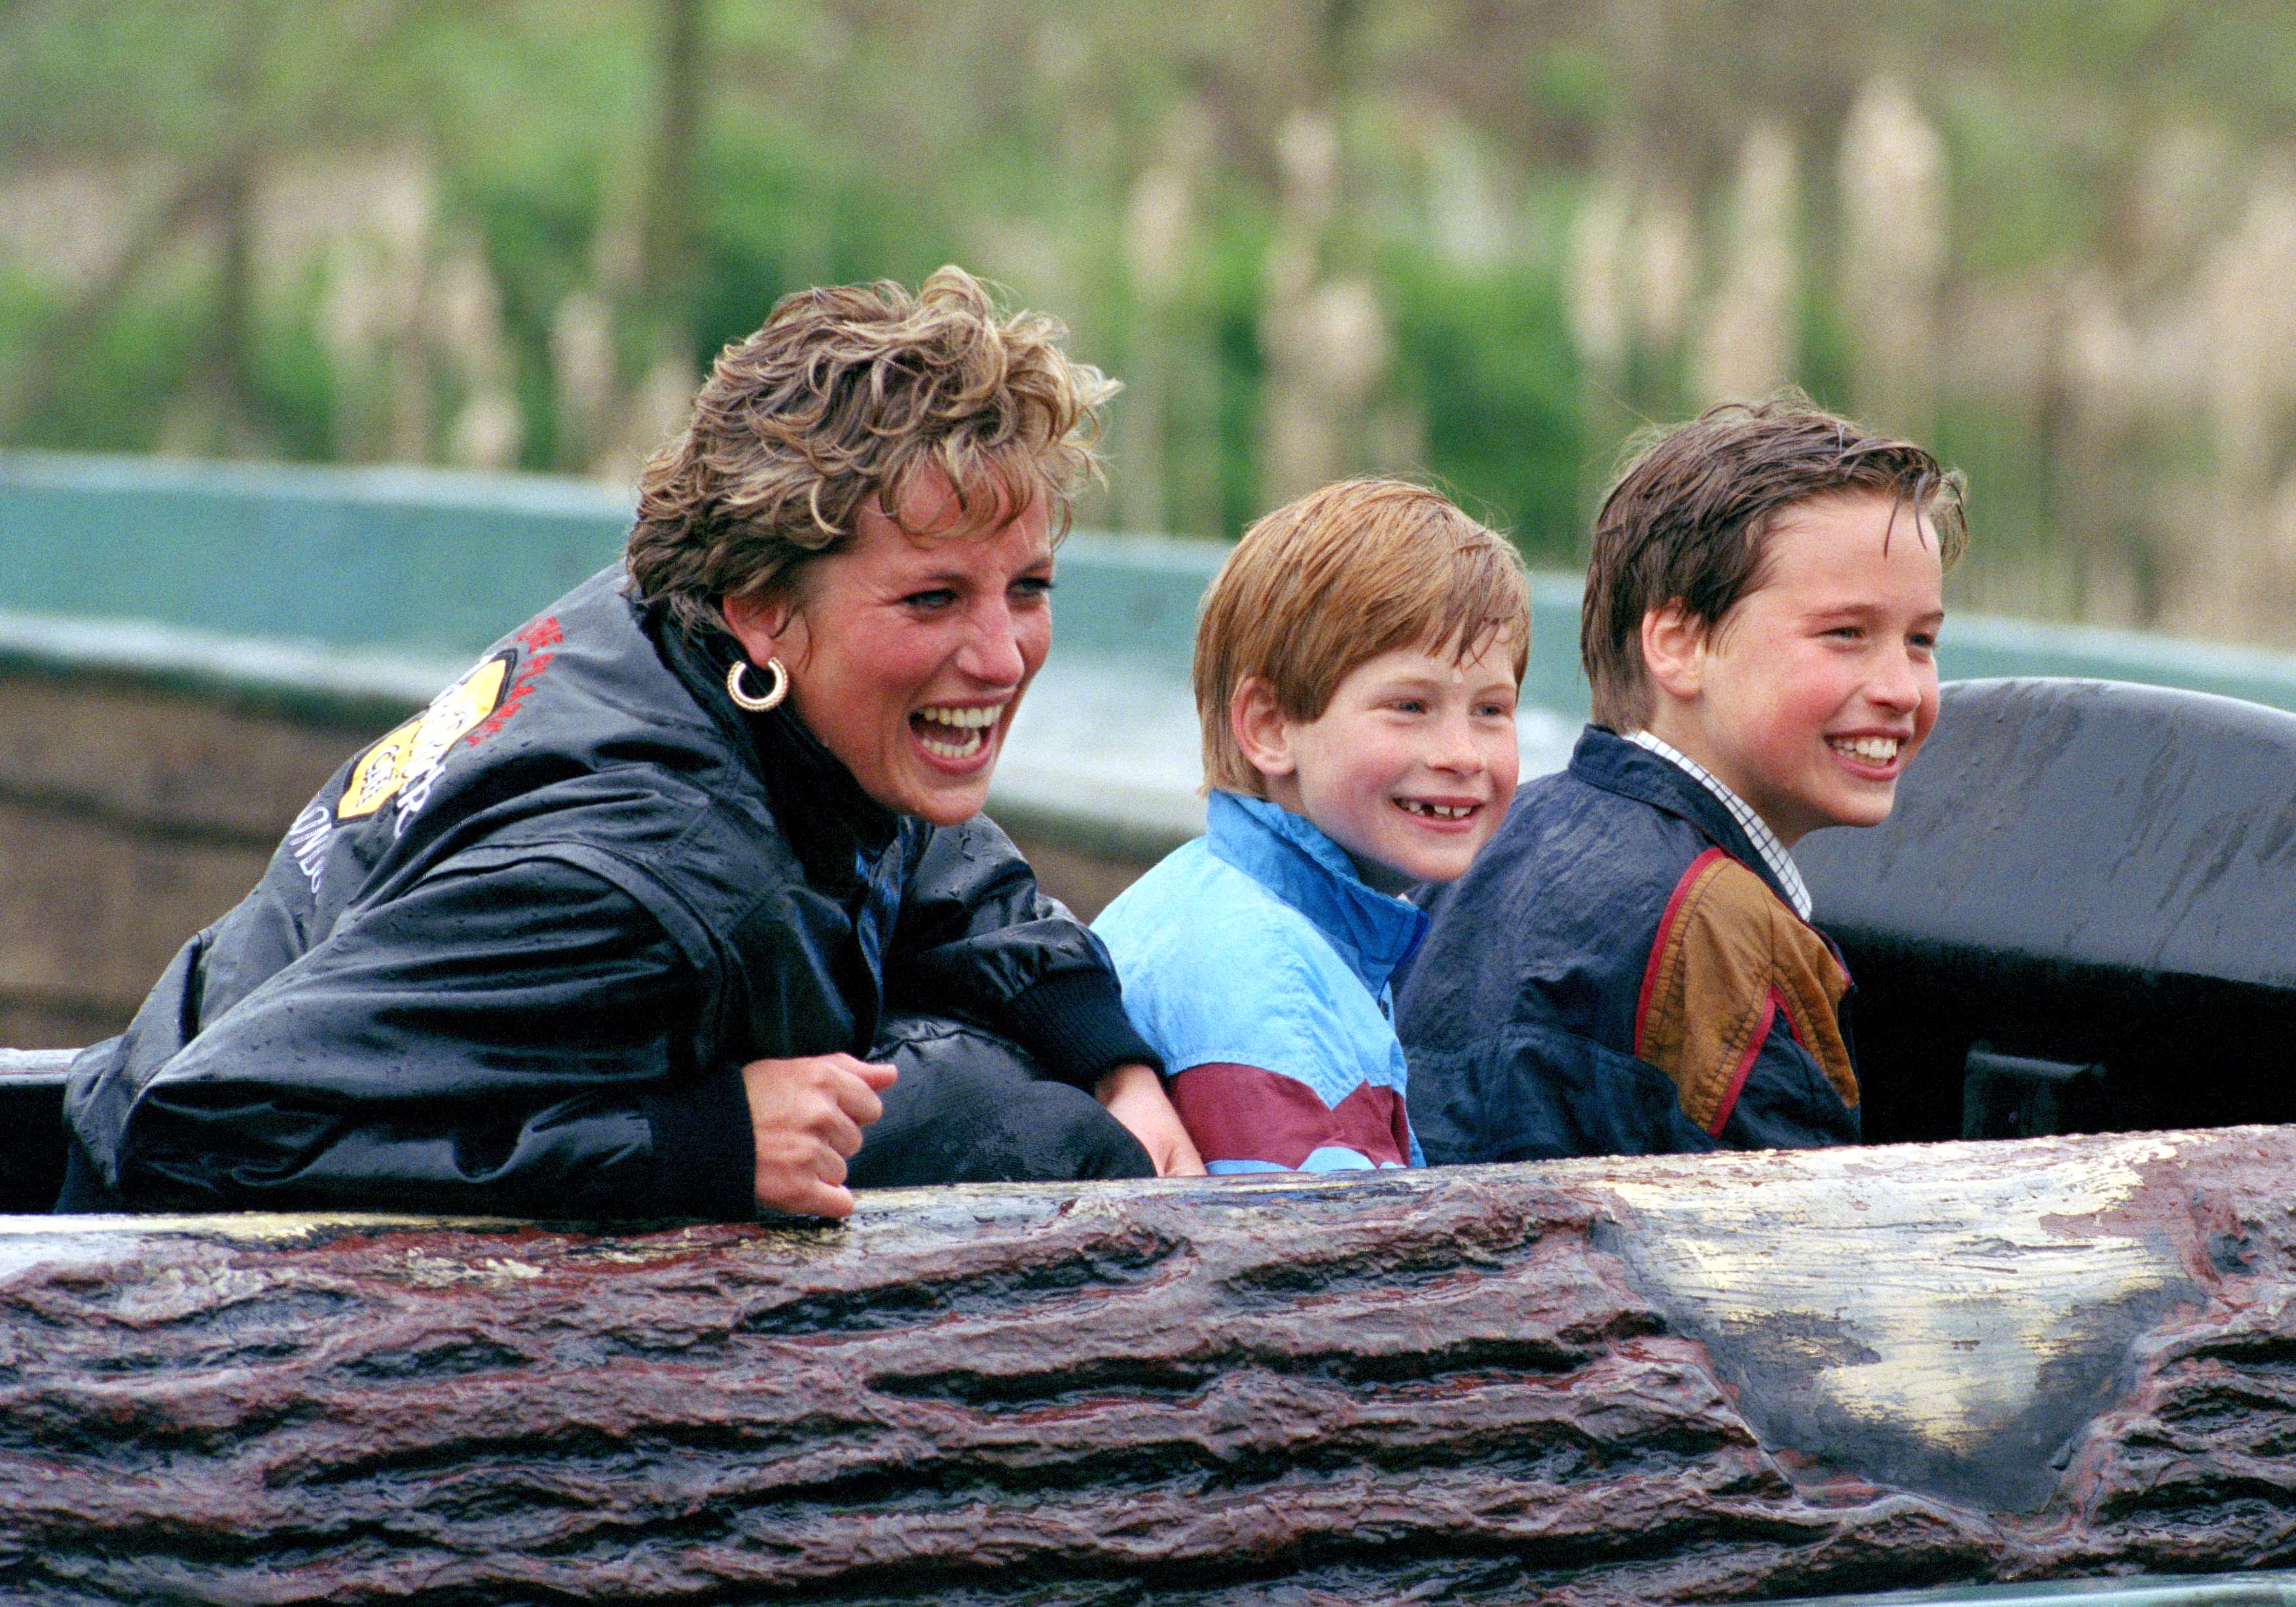 Diana Princess Of Wales with her sons Prince William and Prince Harry during a visit to the "Thorpe Park" Amusement Park on April 13, 1993 | Source: Getty Images